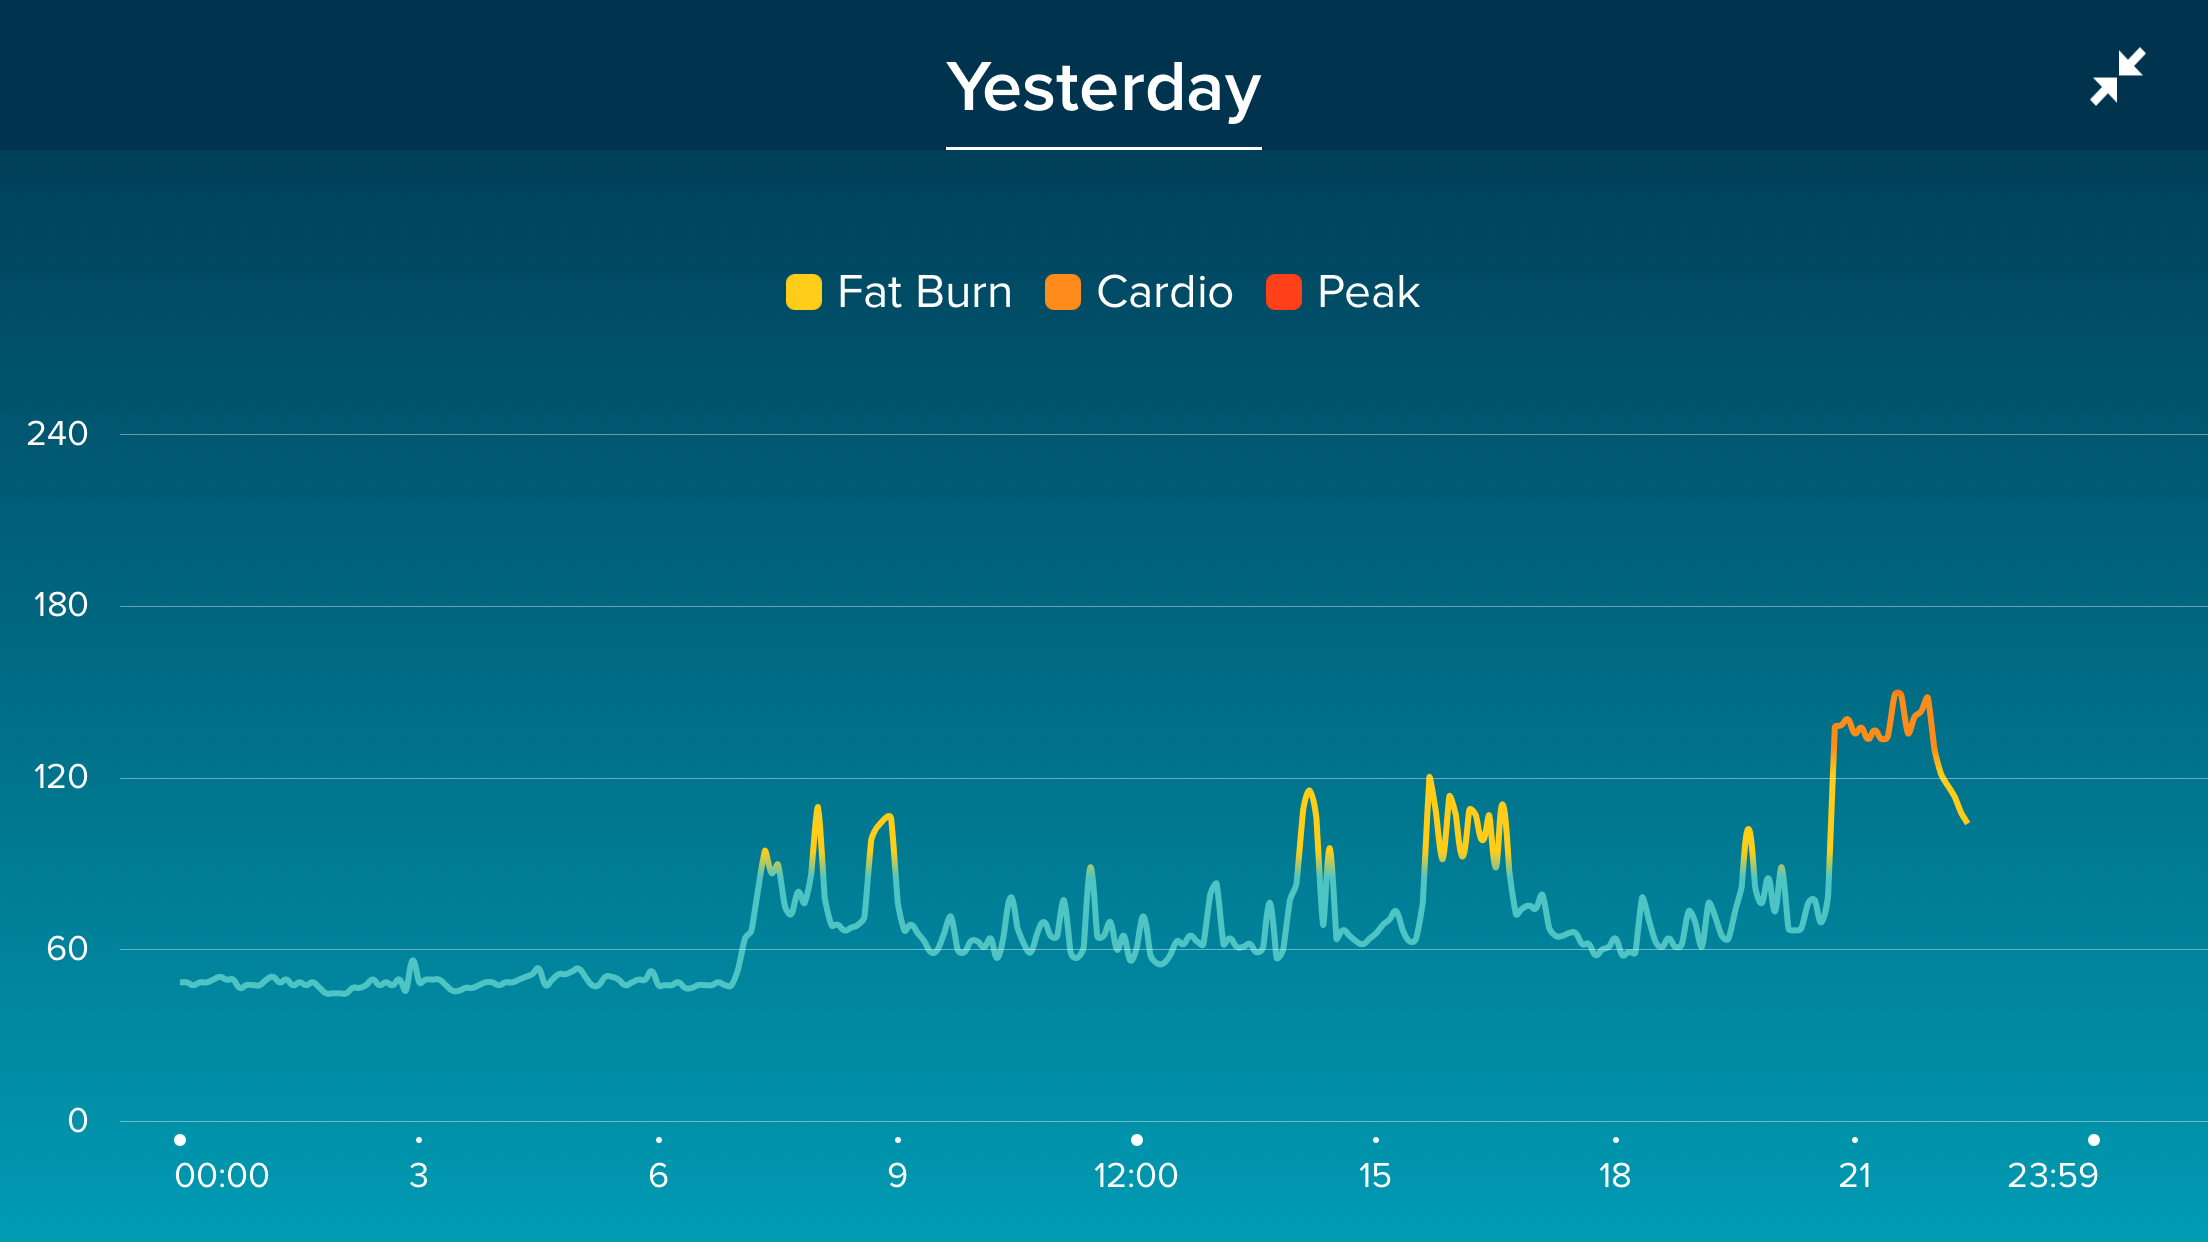 fitbit blaze heart rate stopped working